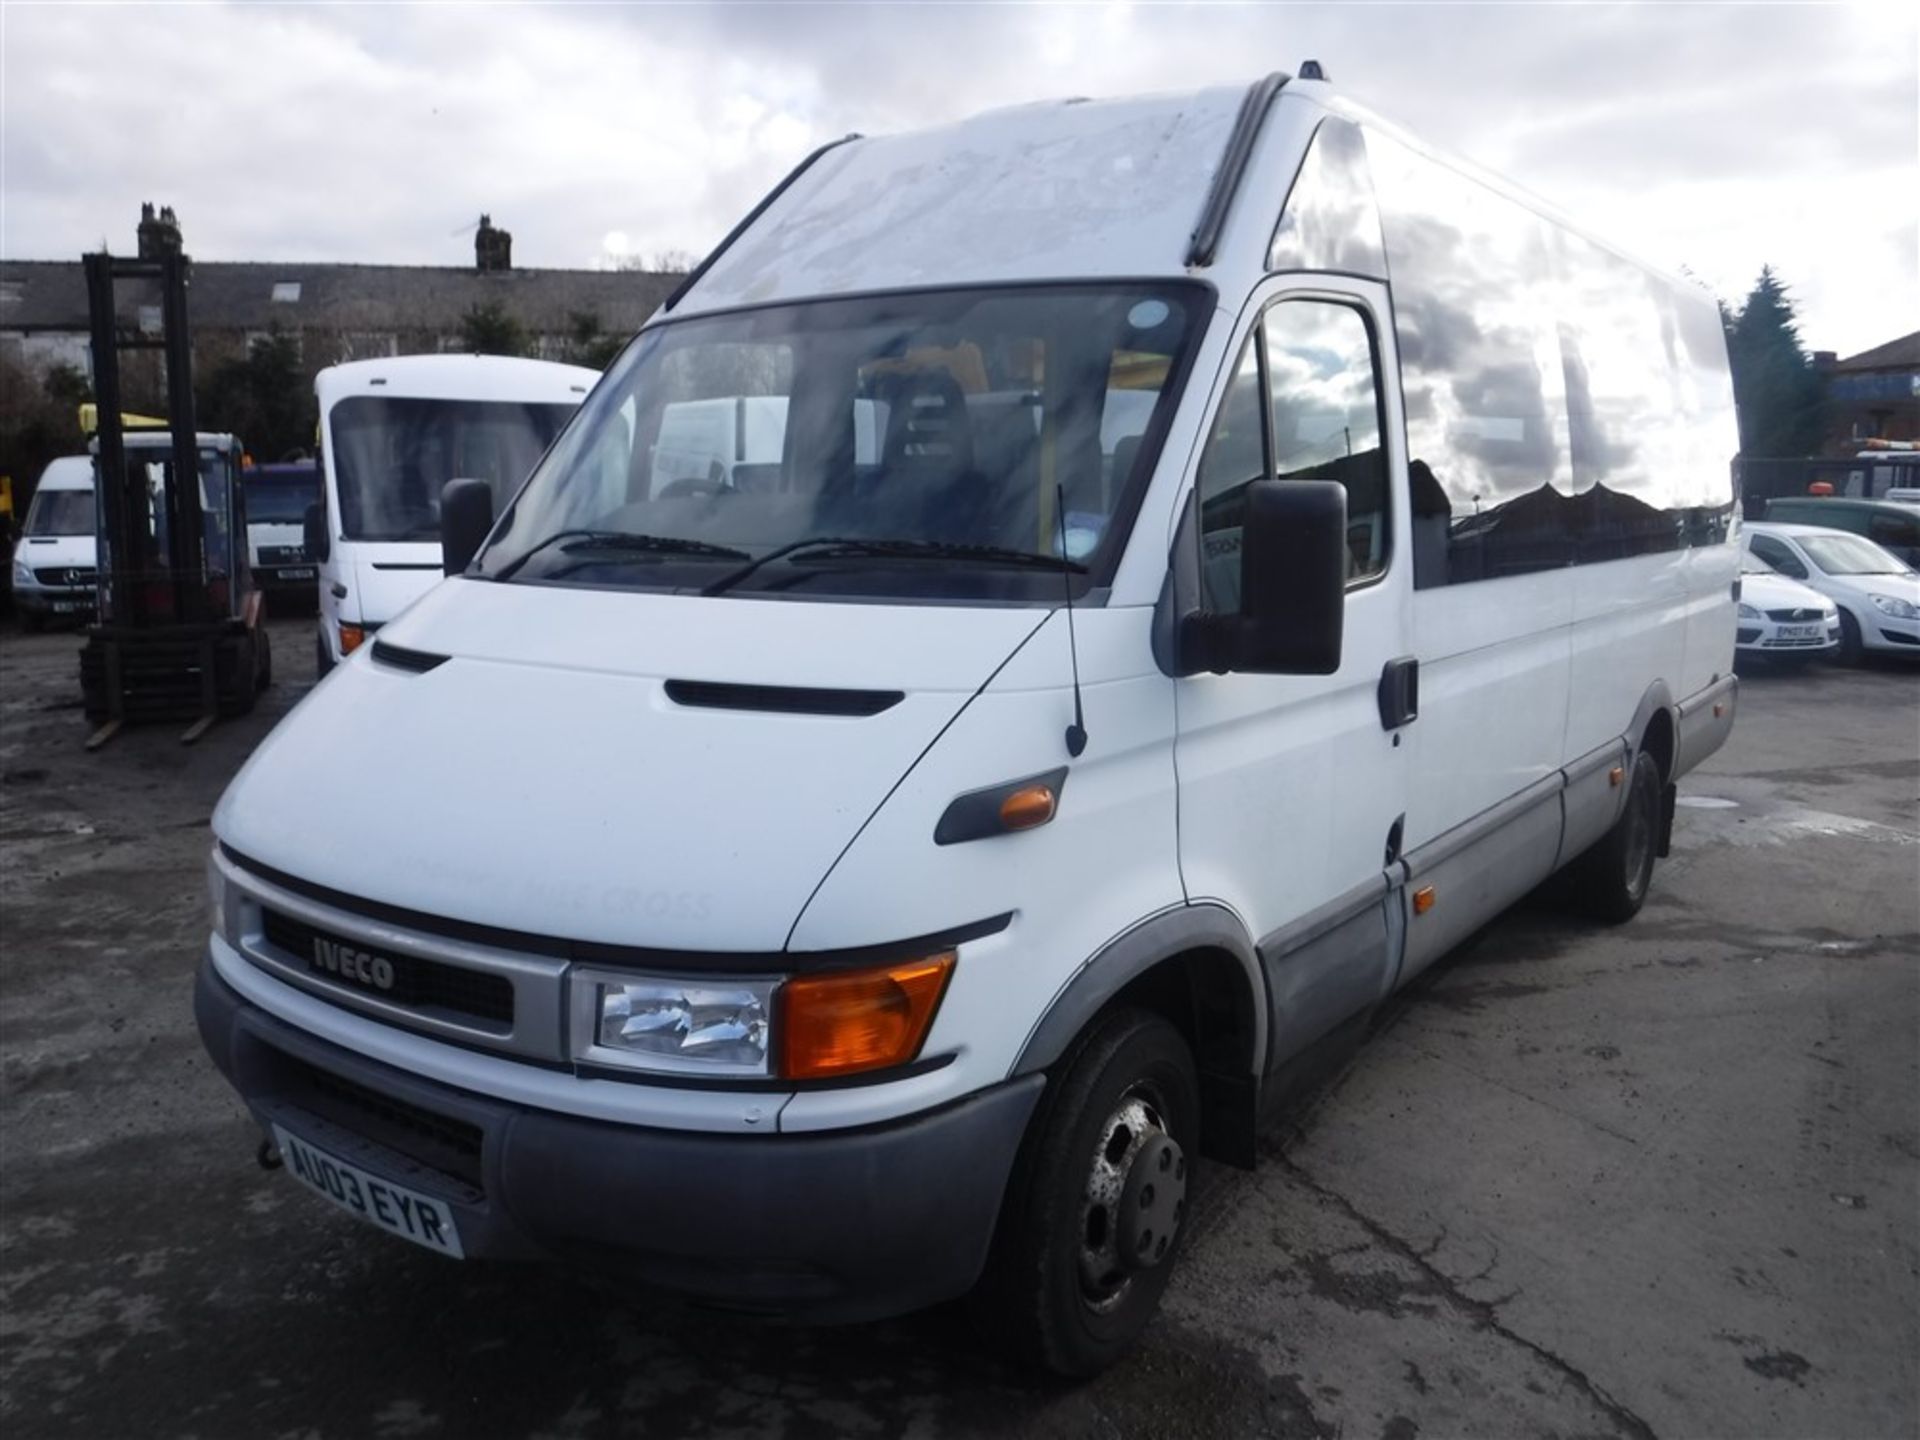 03 reg IVECO DAILY 40C13 IRIS BUS, 1ST REG 03/03, TEST 03/19, 105672KM WARRANTED, V5 HERE, 1 OWNER - Image 2 of 6